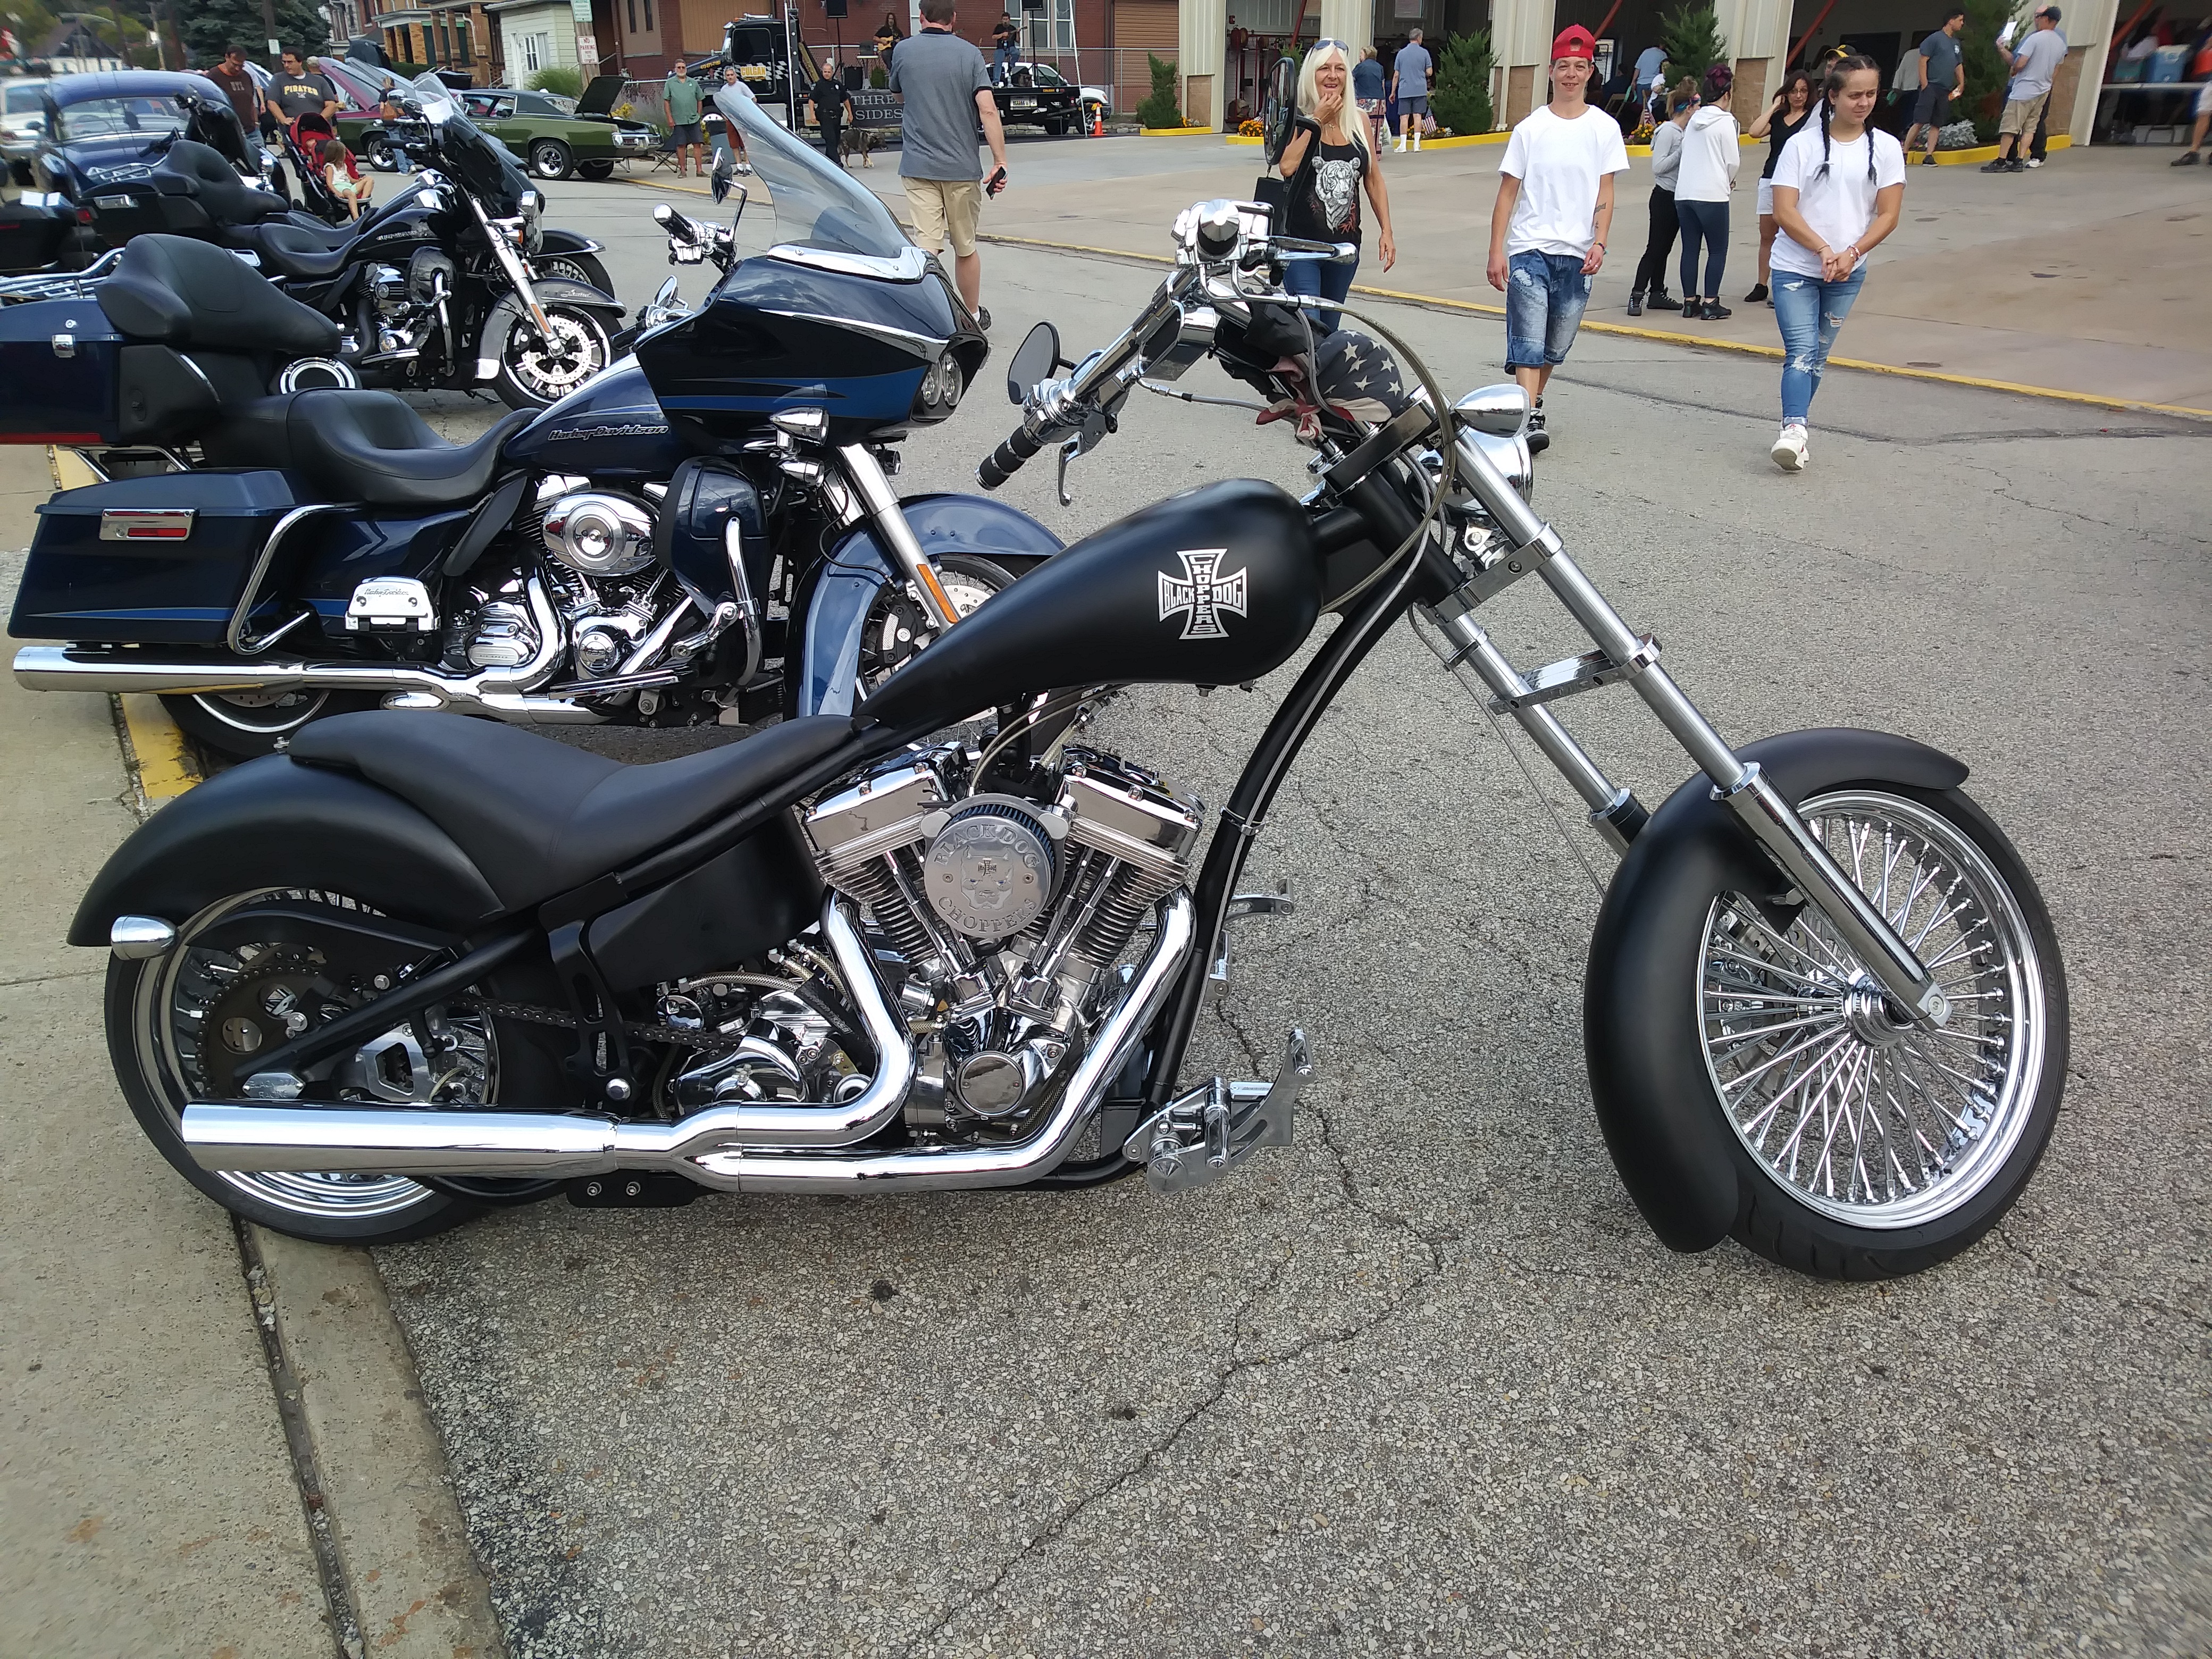 Choppers On The Street